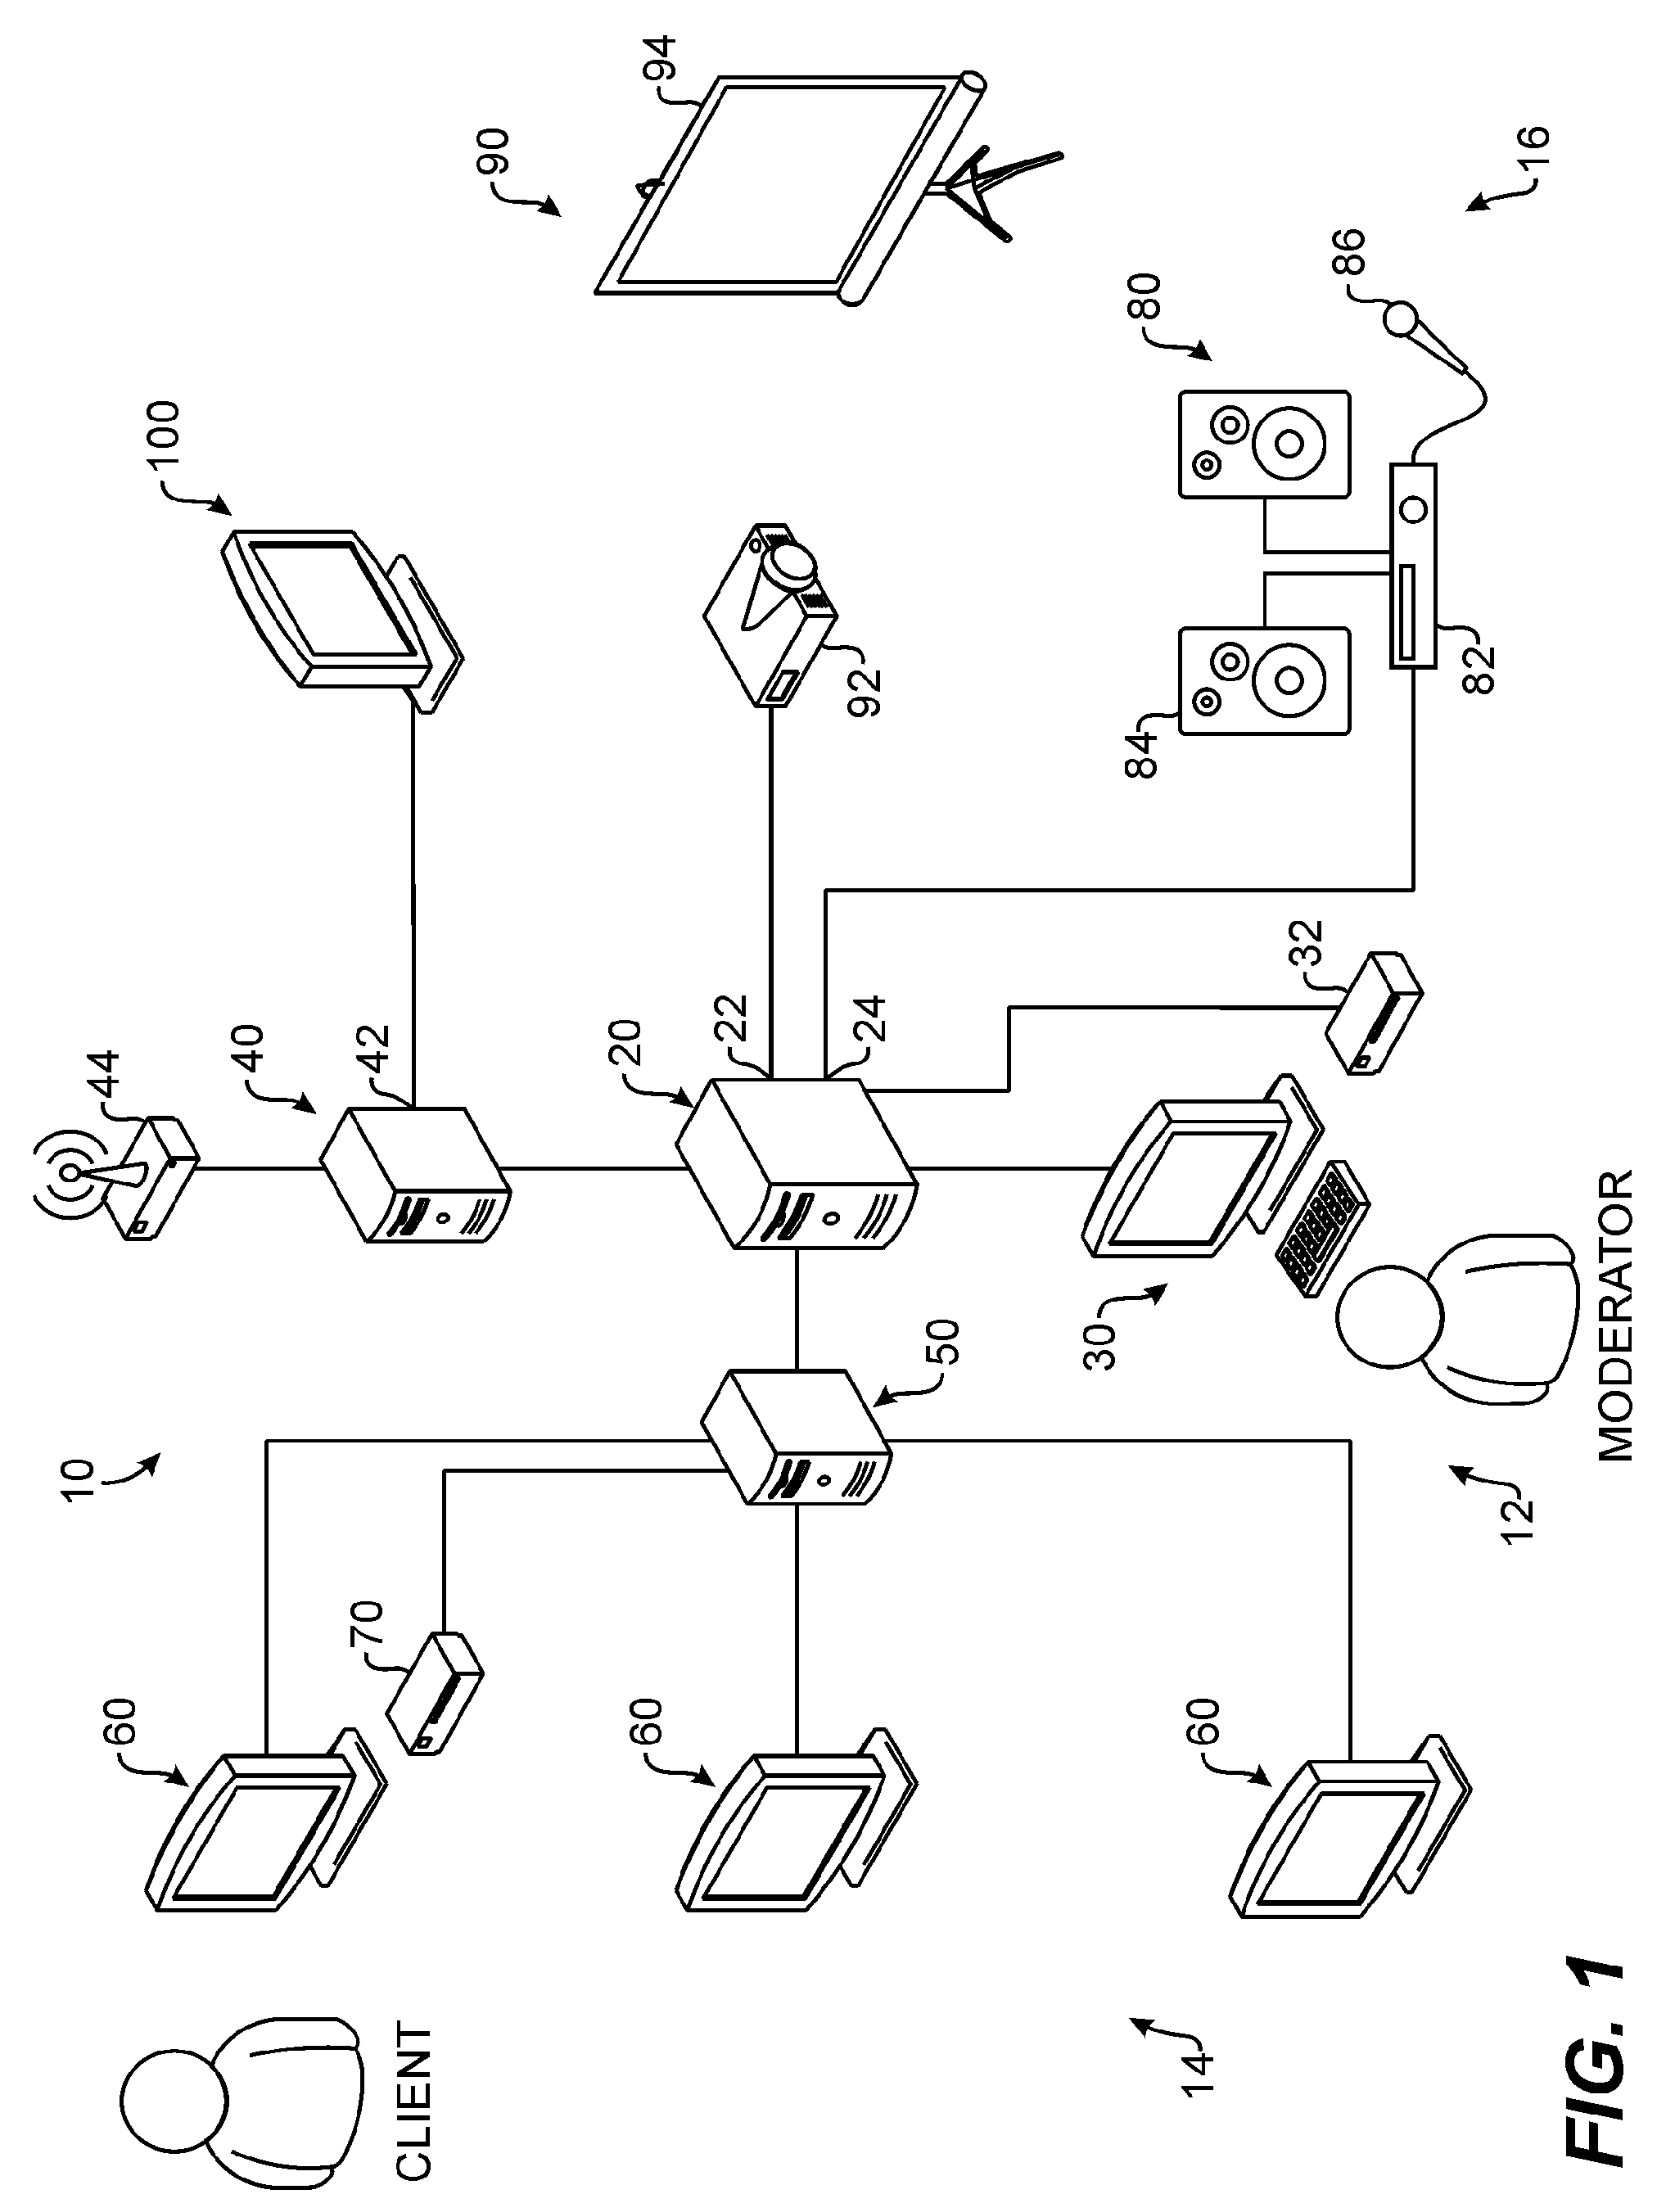 System and method for conducting multimedia karaoke sessions